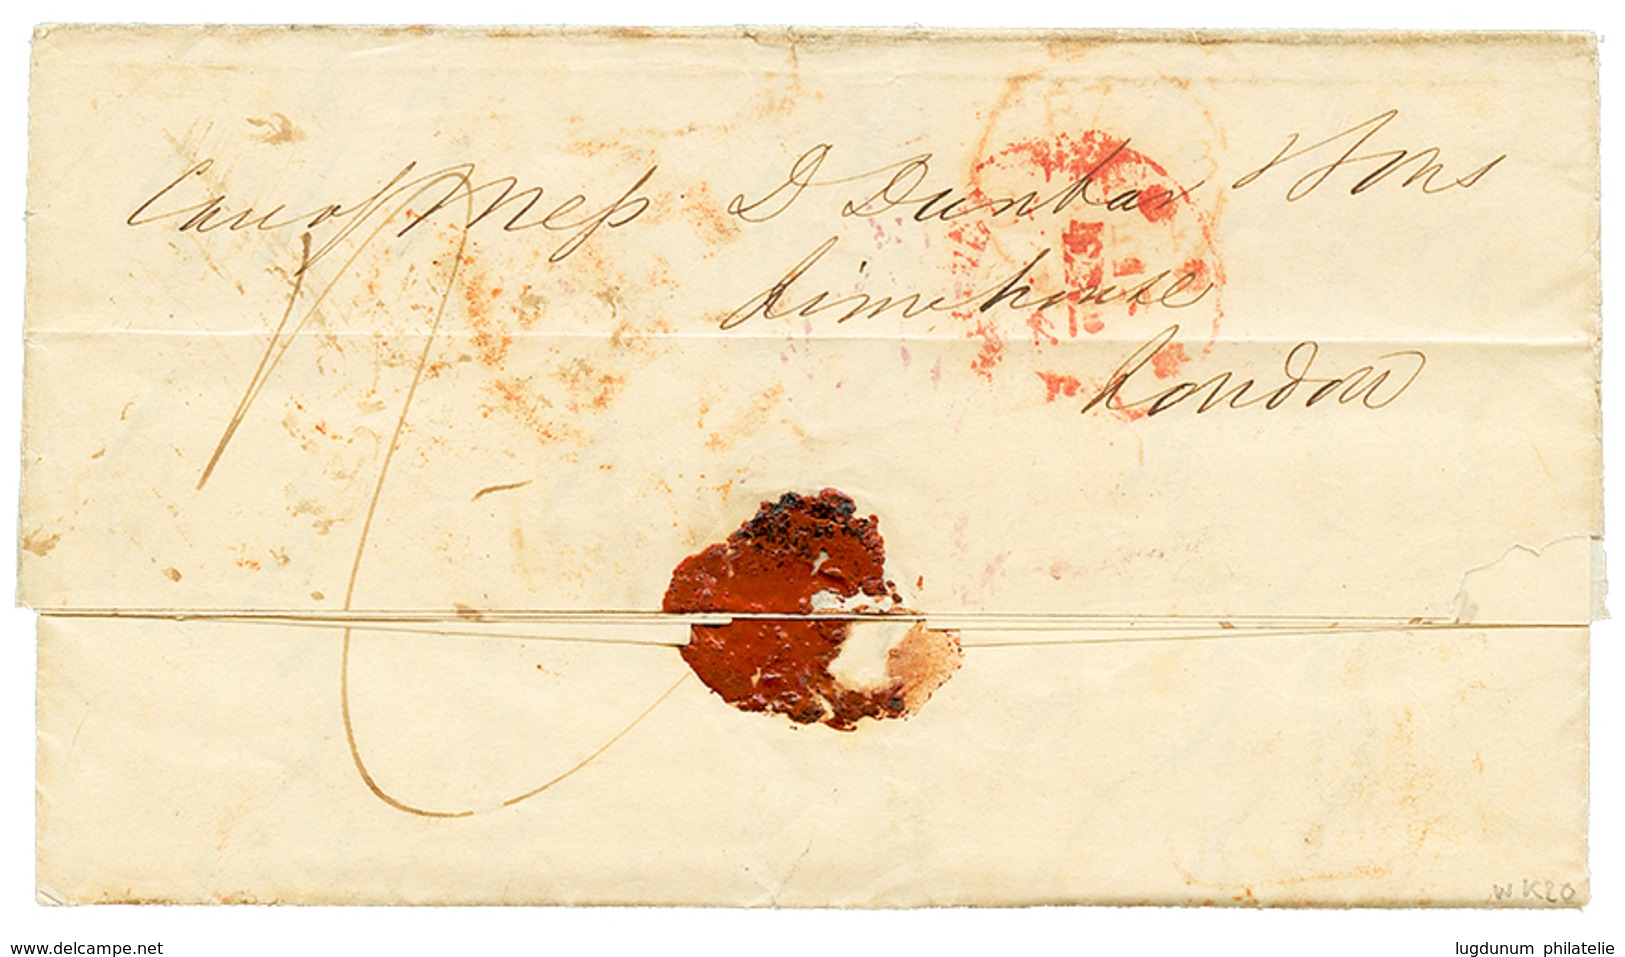 746 "ST HELENA To SPAIN" : 1854 P.F Red + LIMEHOUSE Blue + Tax Marking On Entire Letter From "STE HELENE" To CADIZ (SPAI - St. Helena